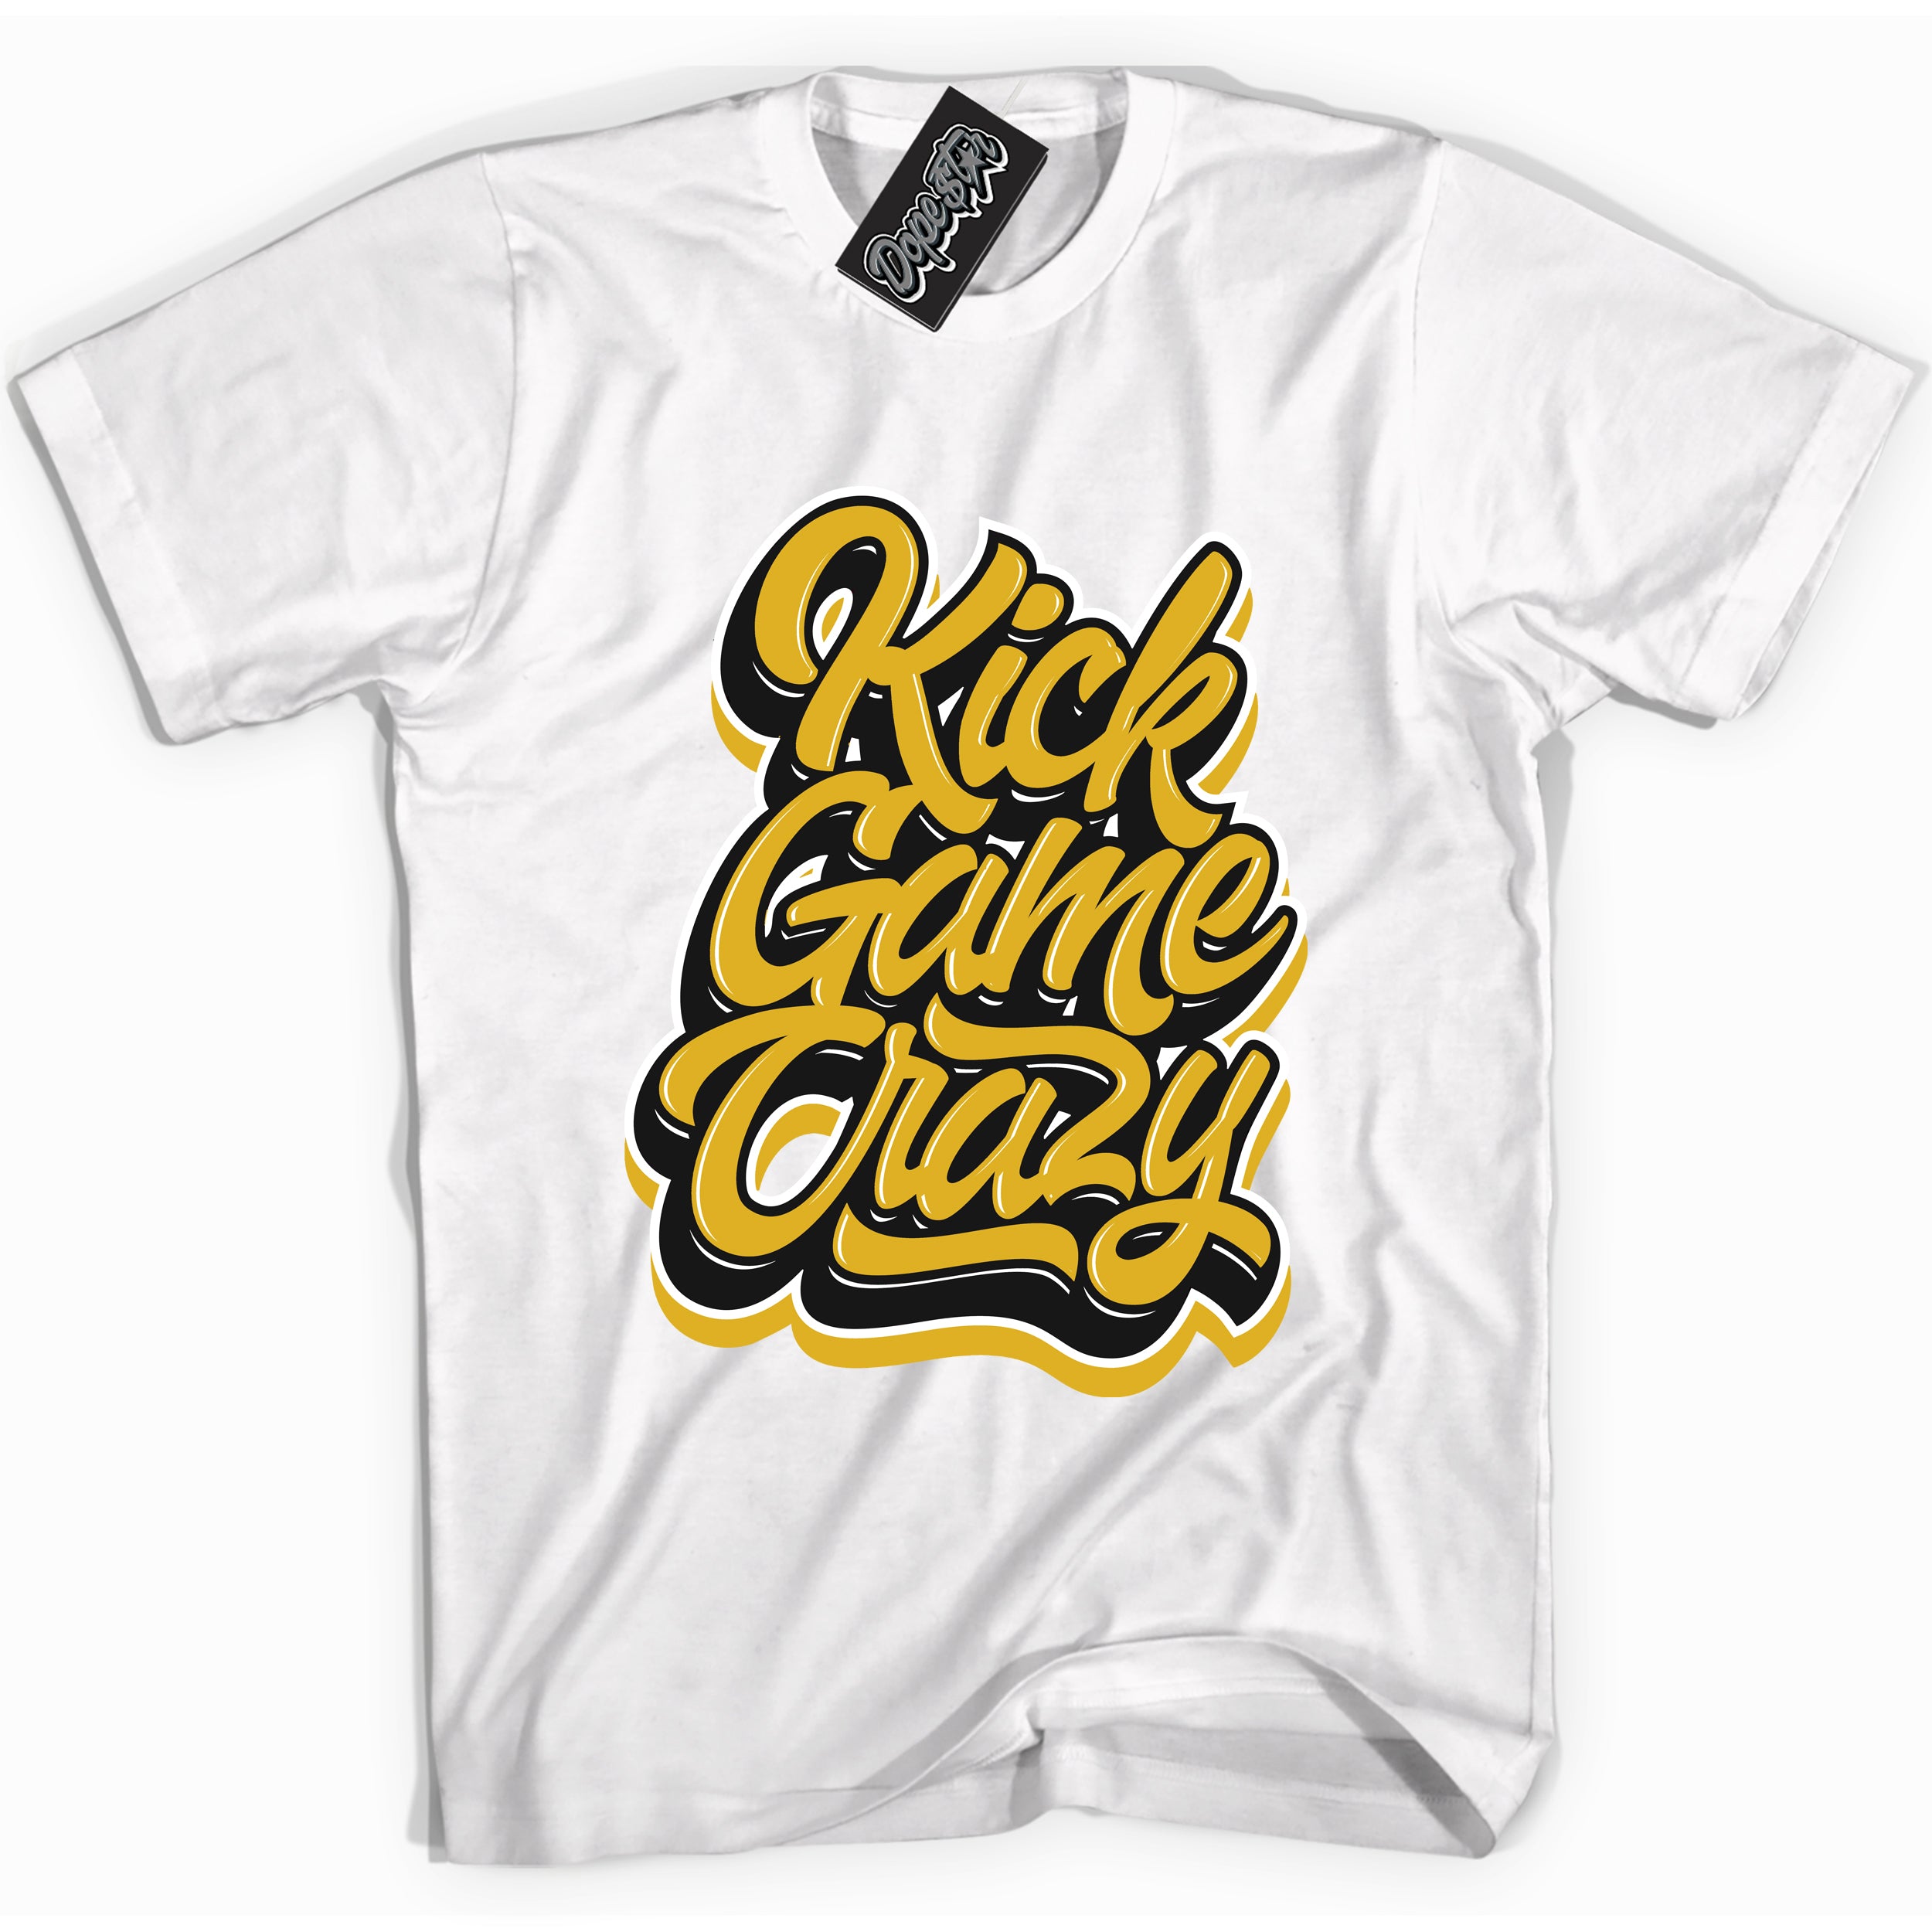 Cool White Shirt with “ Kick Game Crazy” design that perfectly matches Yellow Ochre 6s Sneakers.